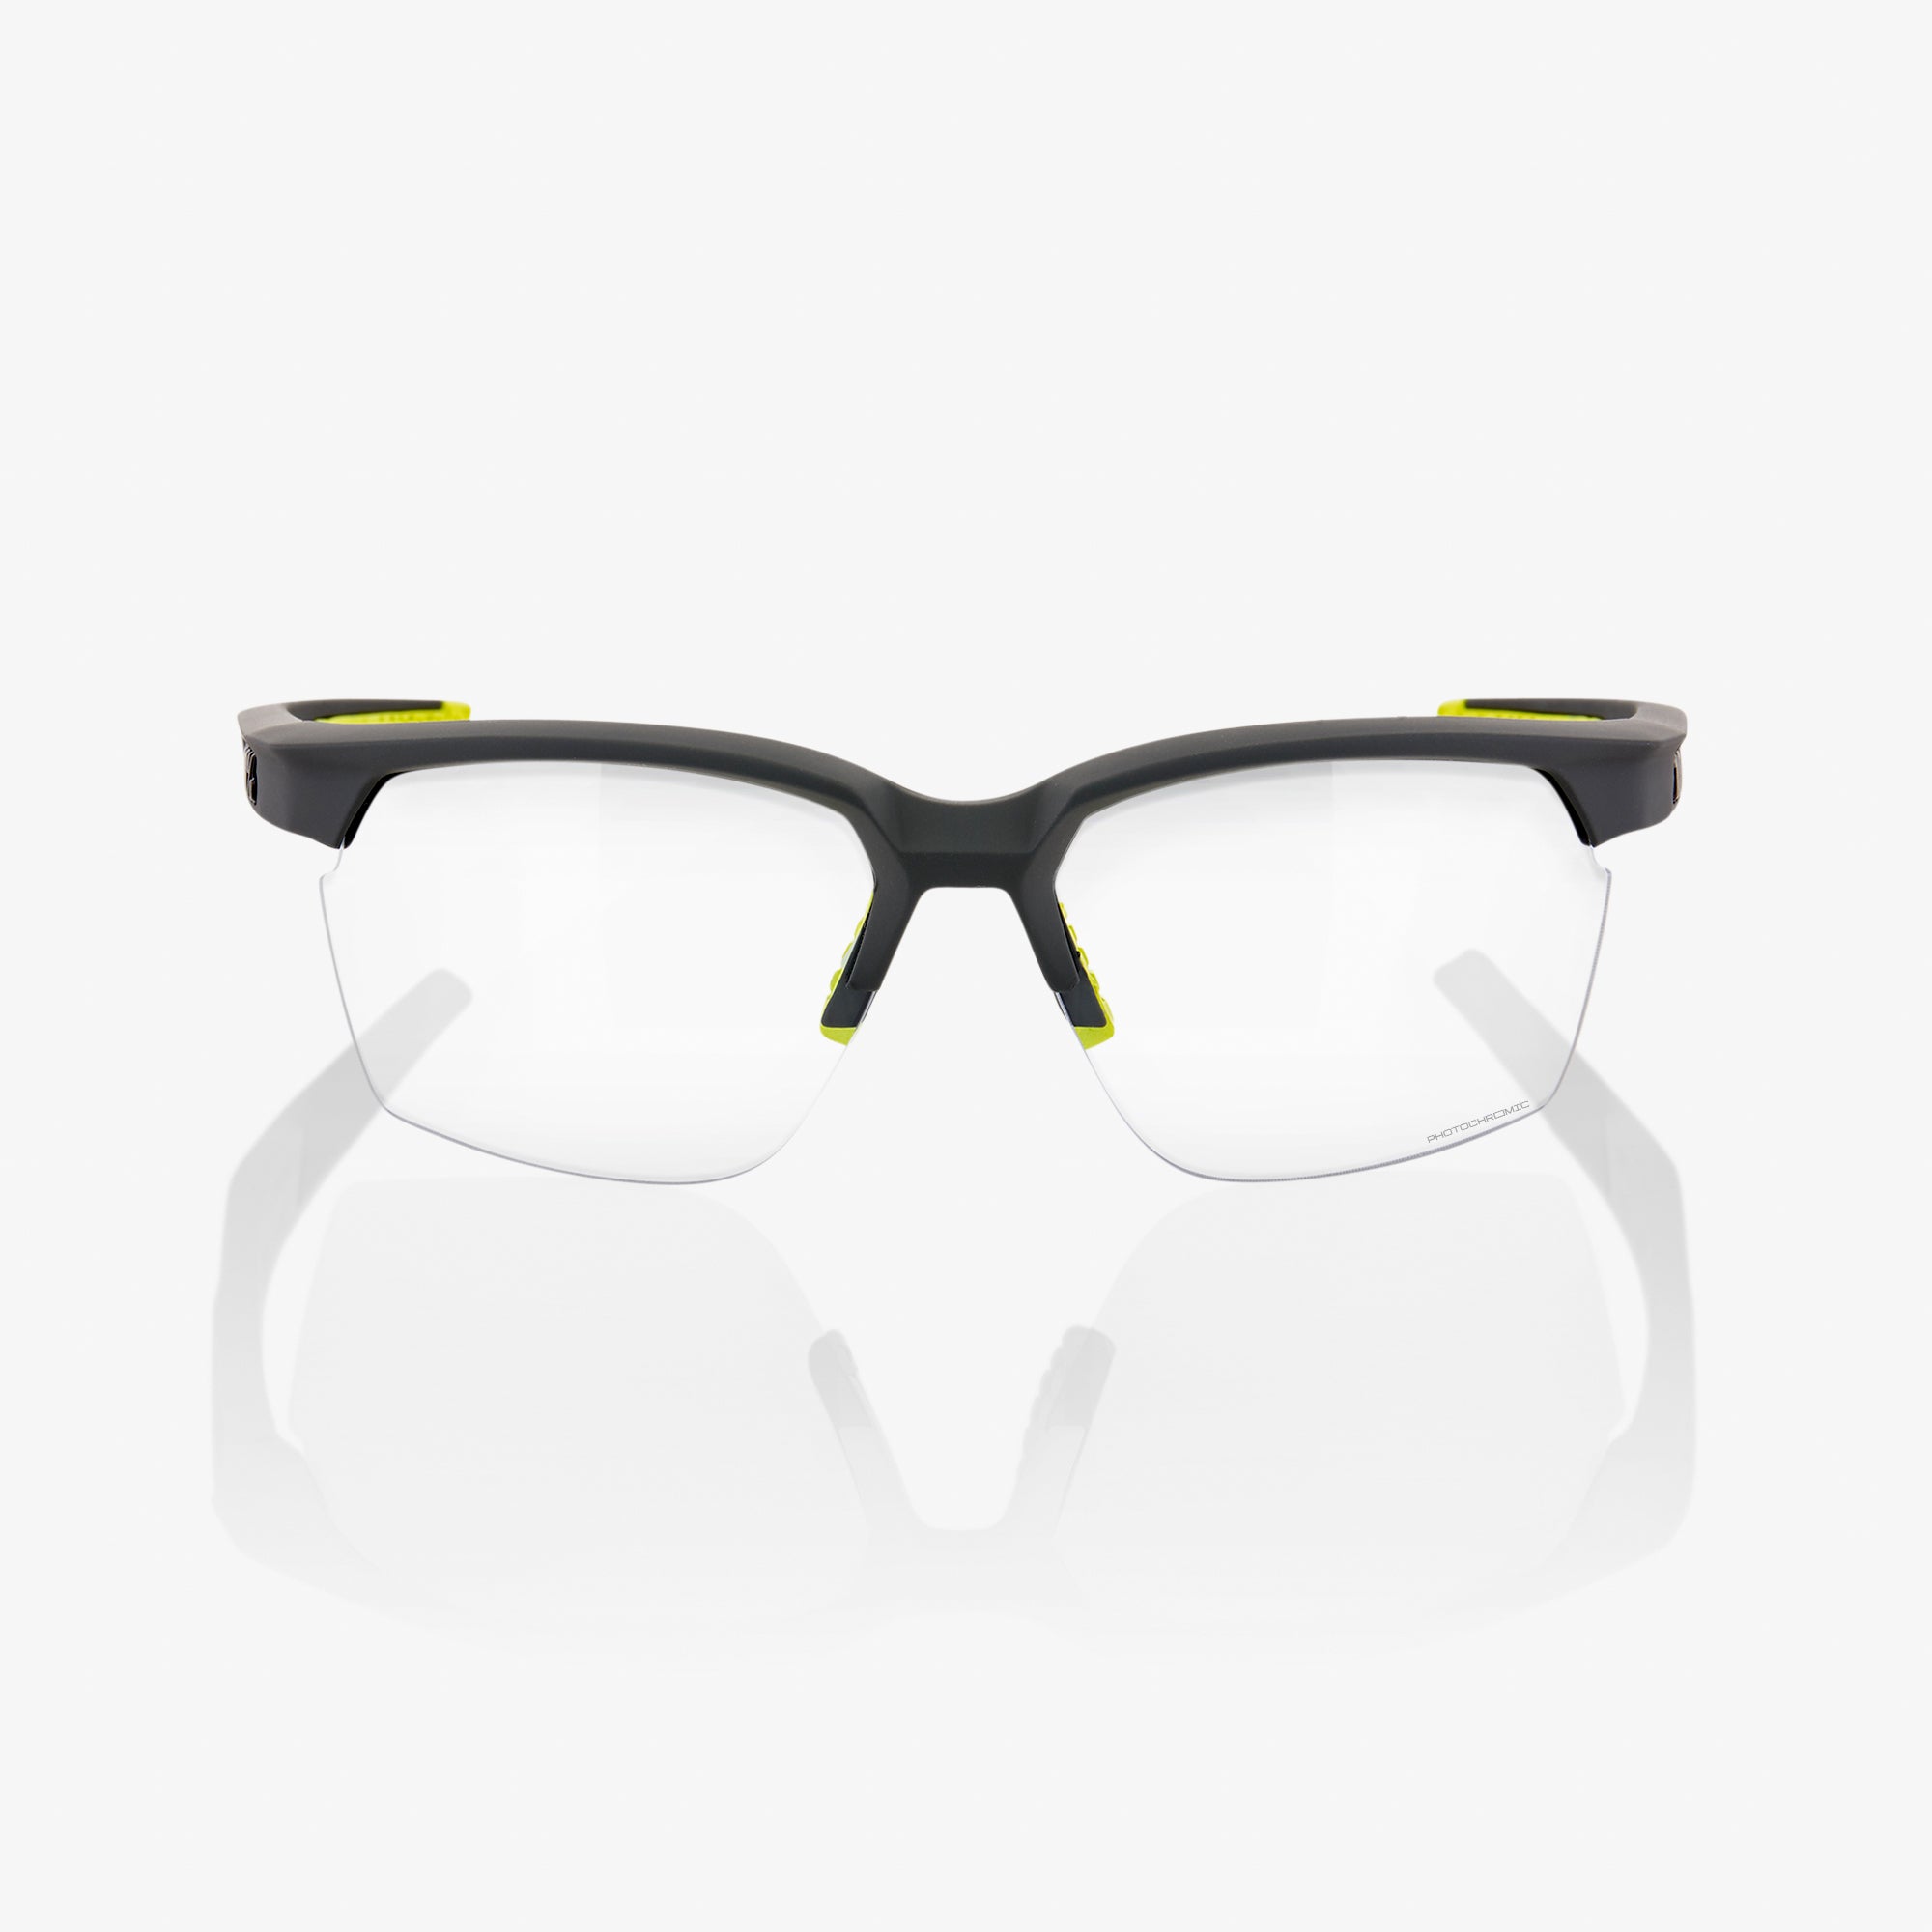 SPORTCOUPE - Soft Tact Cool Grey - Photochromic Lens - Secondary